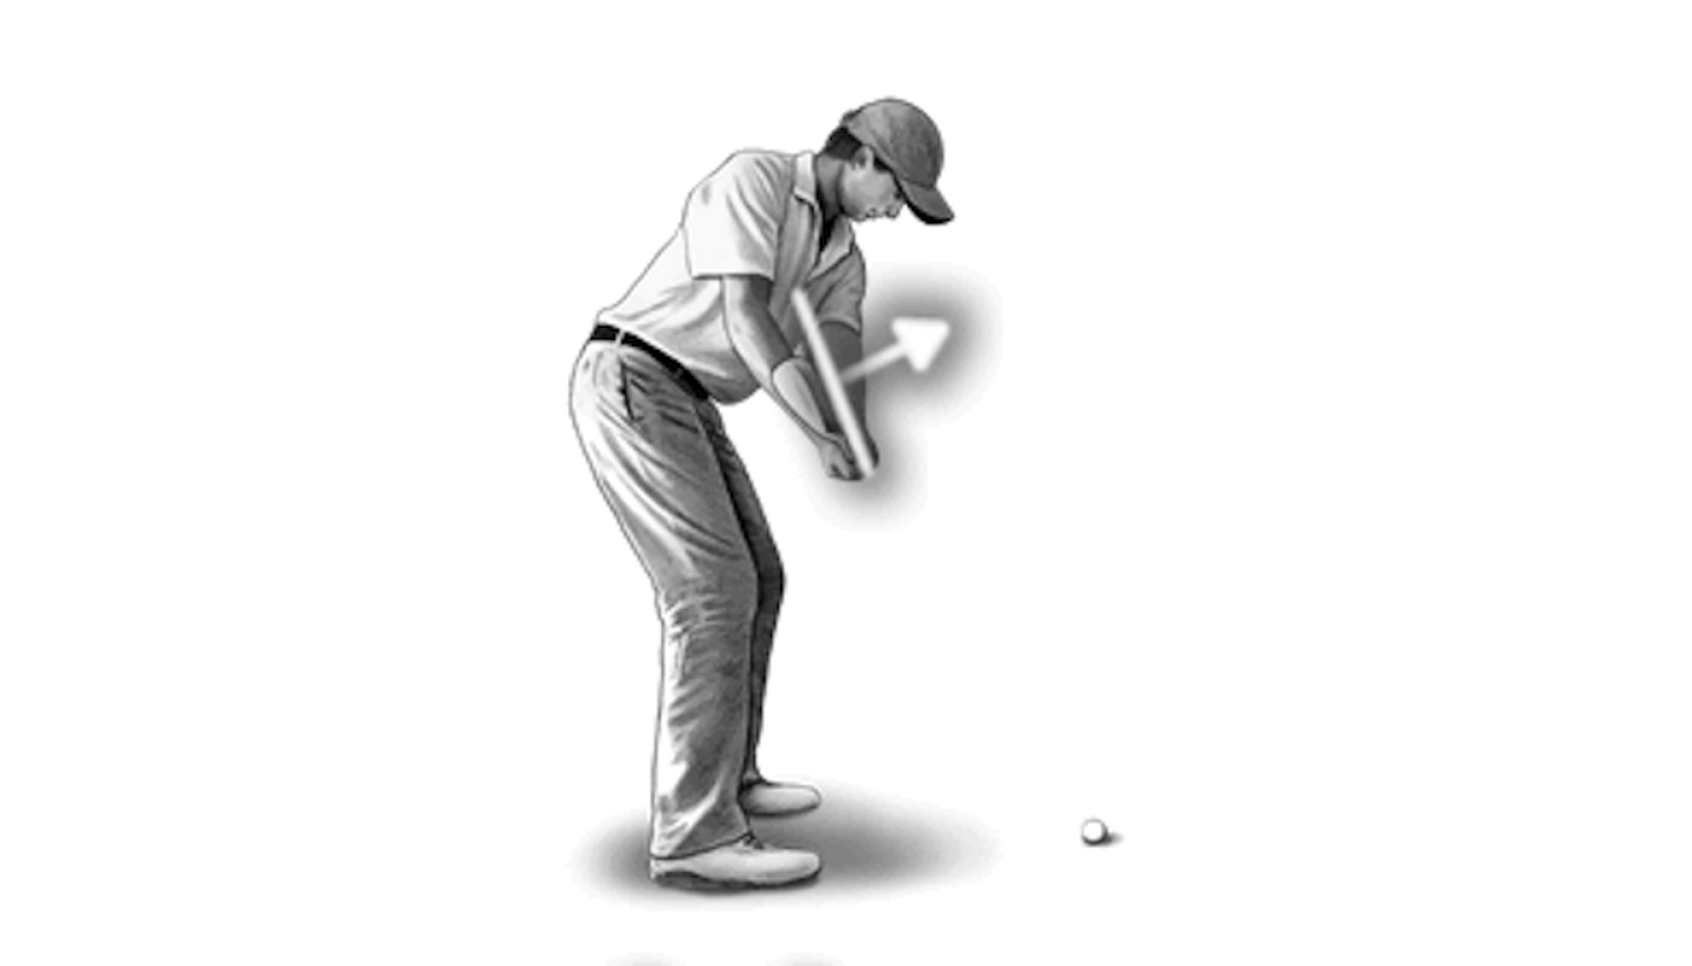 Major winner: A good feel to fix this slice-causing backswing mistake